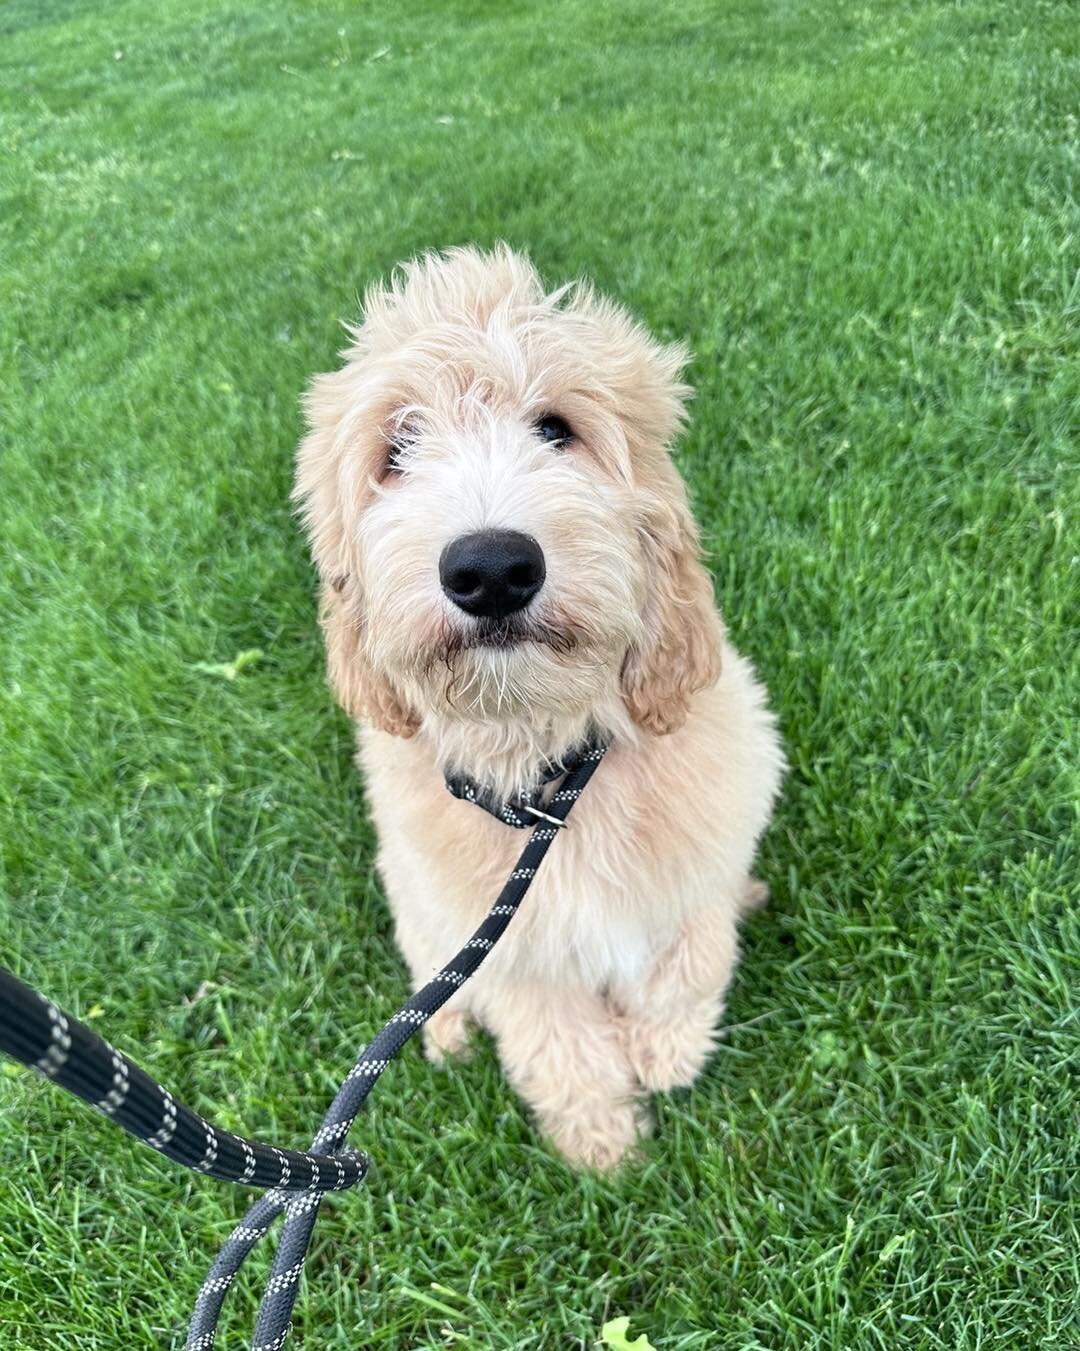 When you want to call Toby &ldquo;Teddy&rdquo; the whole trip because he looks so much like a teddy bear! 

So happy we got to work with Allison Family Doodles to help get this sweet boy from Tennessee to Montana!

Need your pup transported? Check ou